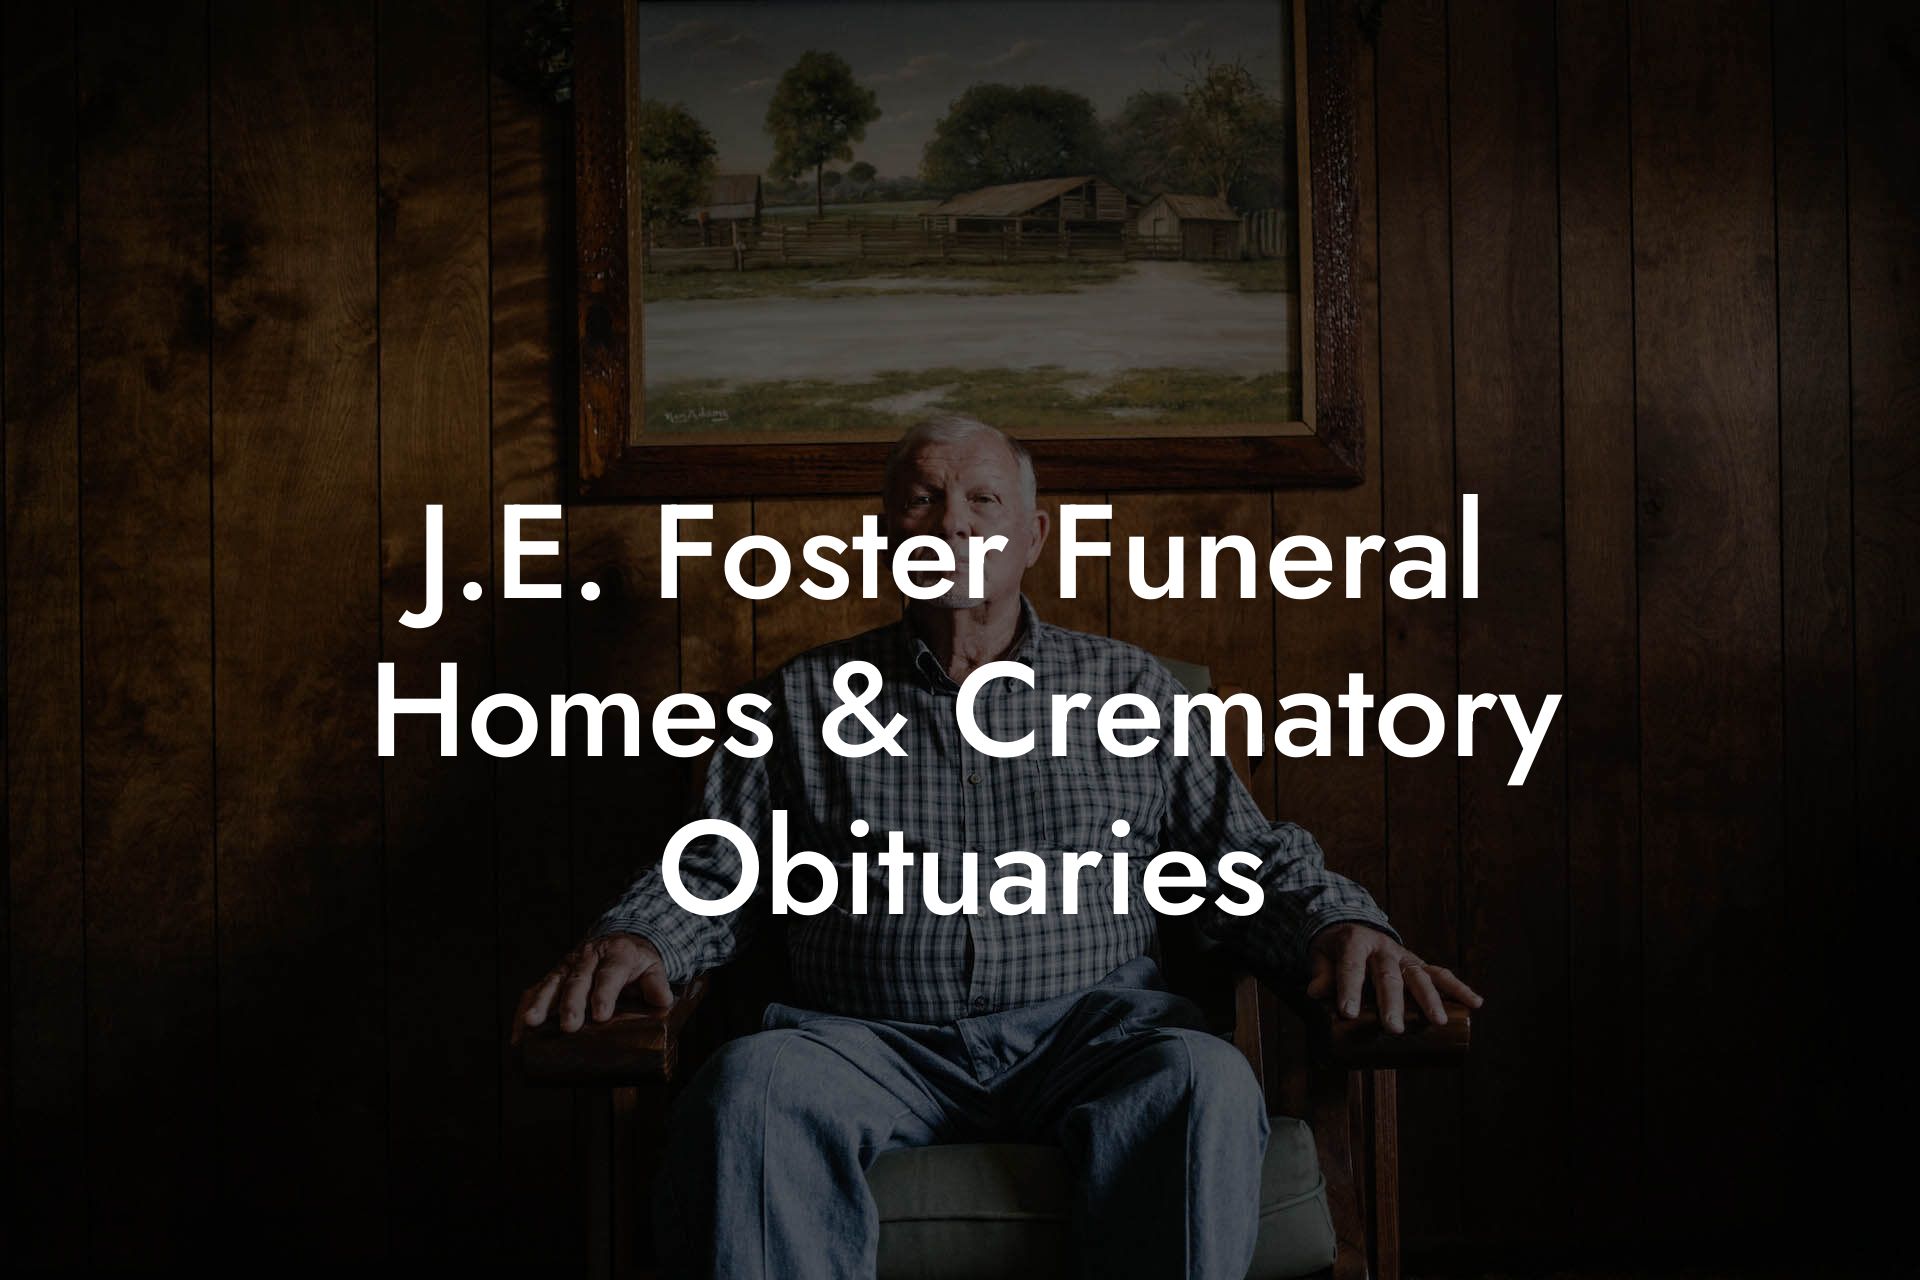 J.E. Foster Funeral Homes & Crematory Obituaries